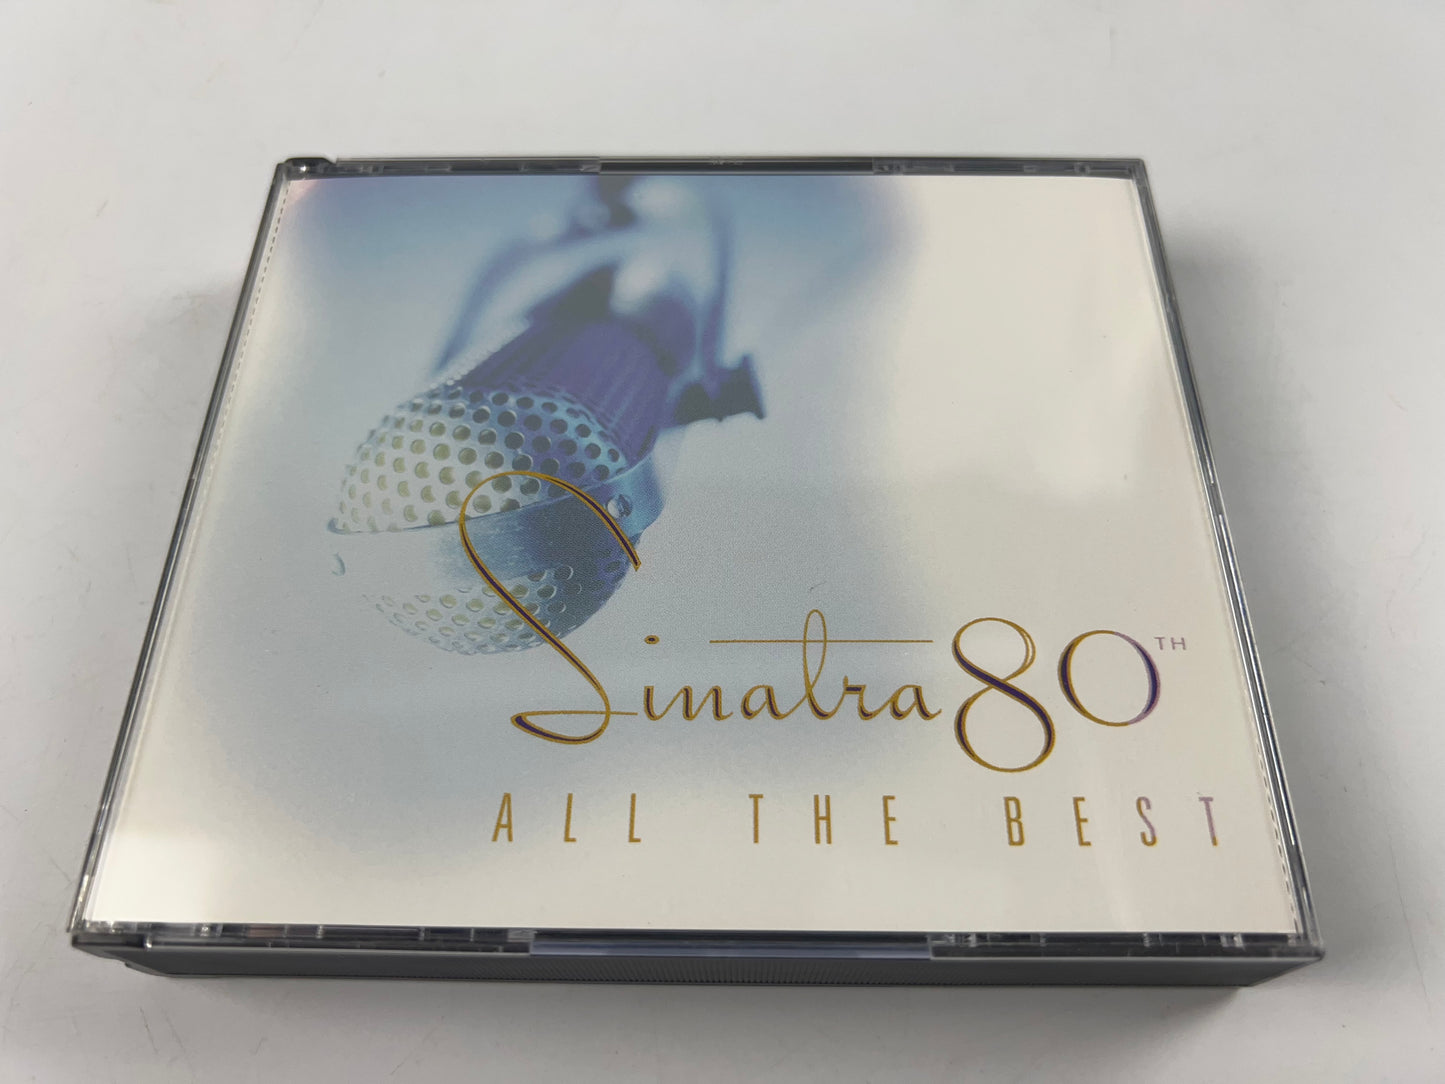 Frank Sinatra 2CD “Sinatra 80th: All the Best”. (Nat King Cole duet).